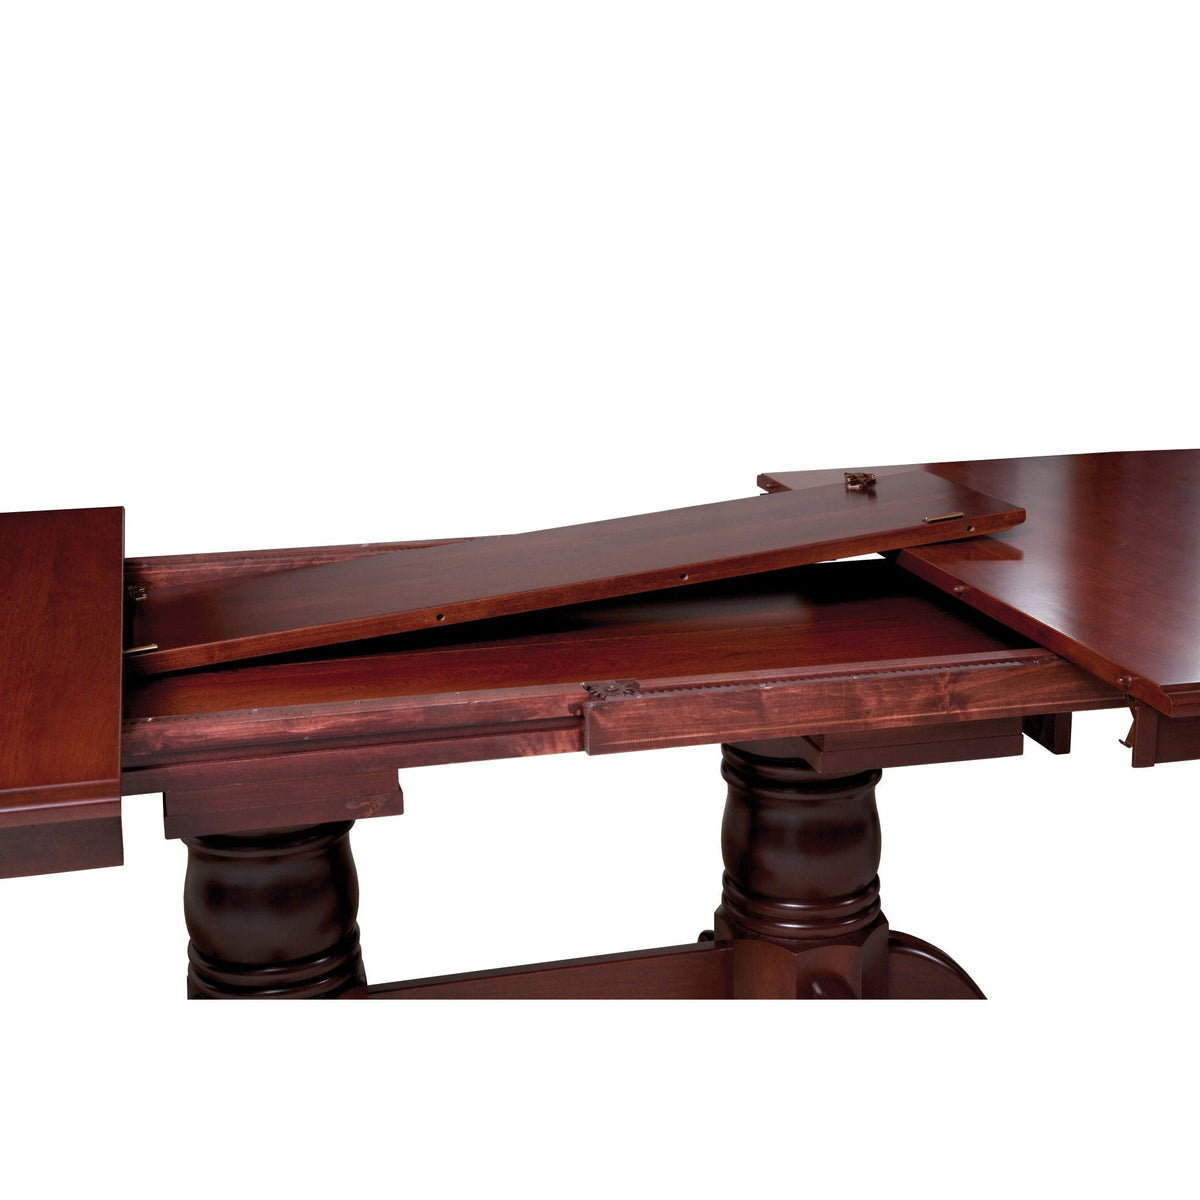 Rockford Double Pedestal Table - snyders.furniture